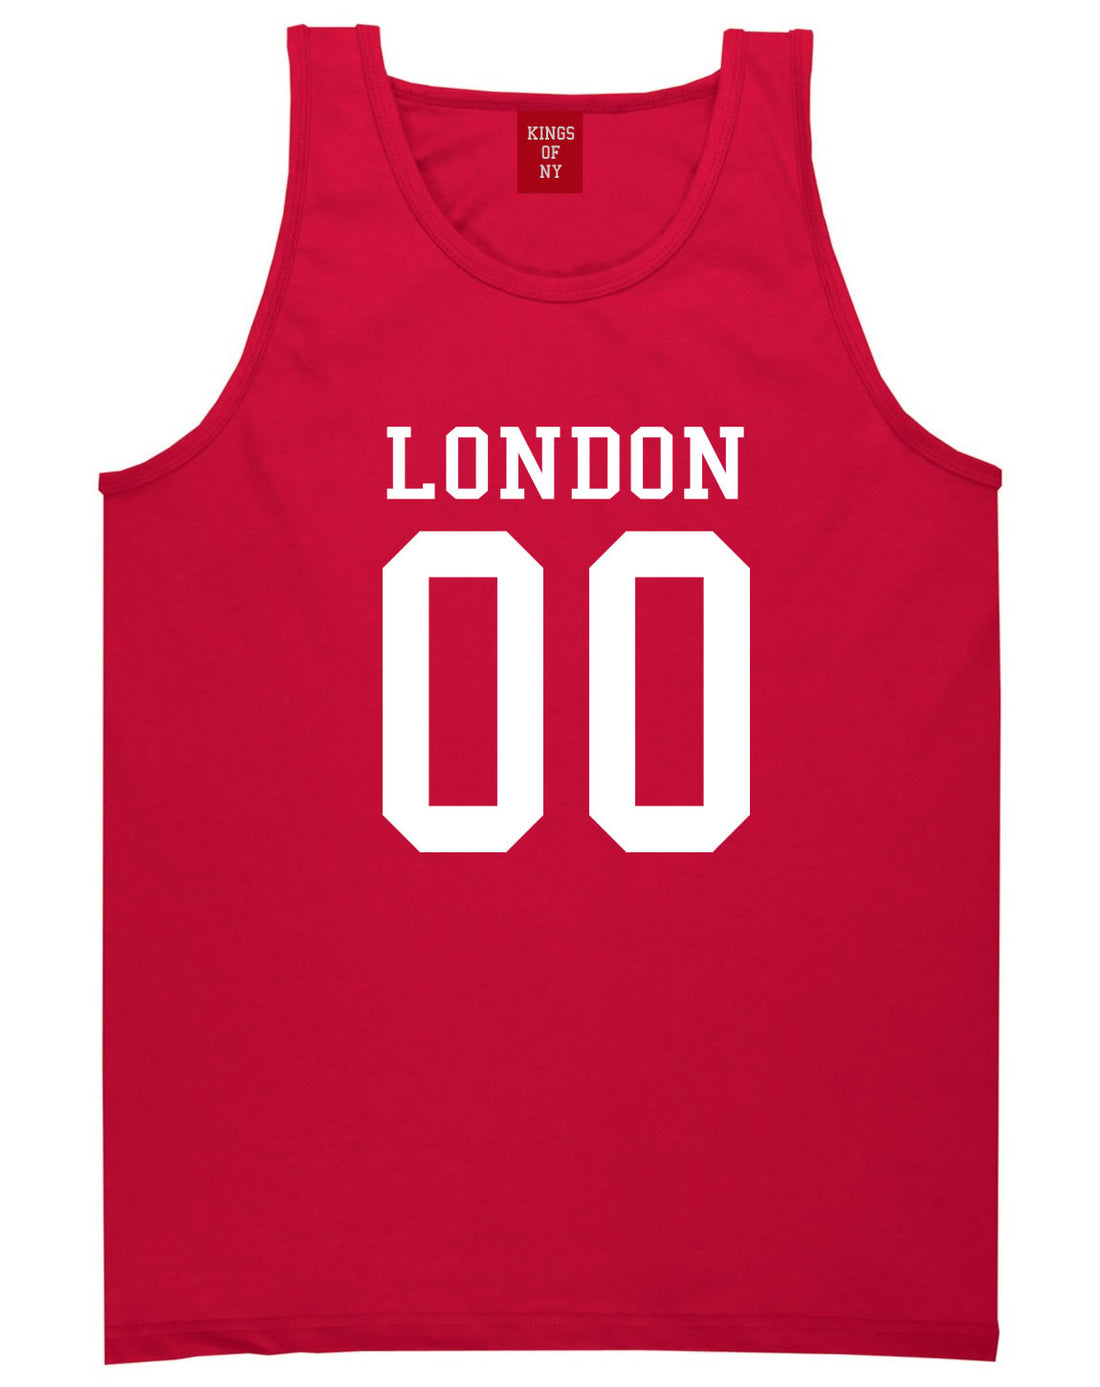 London Team 00 Jersey Tank Top in Red By Kings Of NY